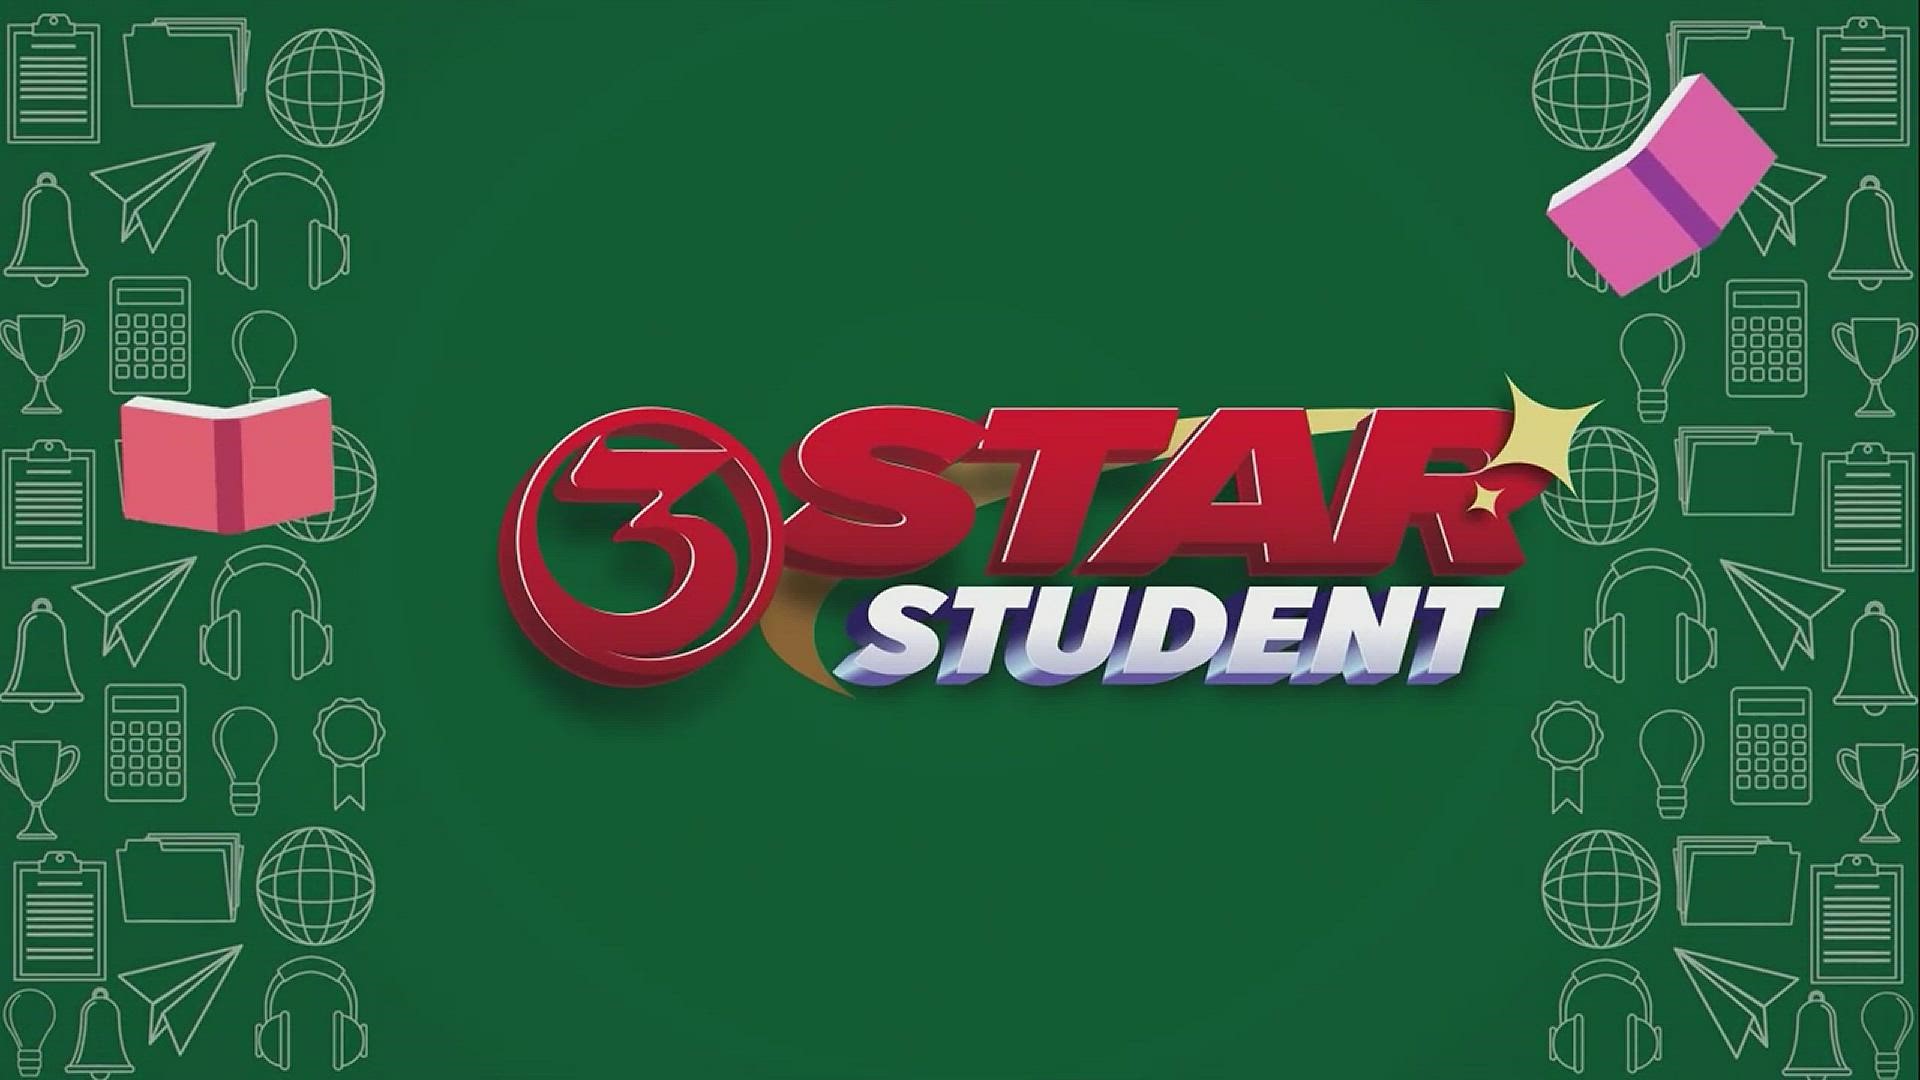 Our 3Star Student of the week is an 8th grader from Miller-Metro.